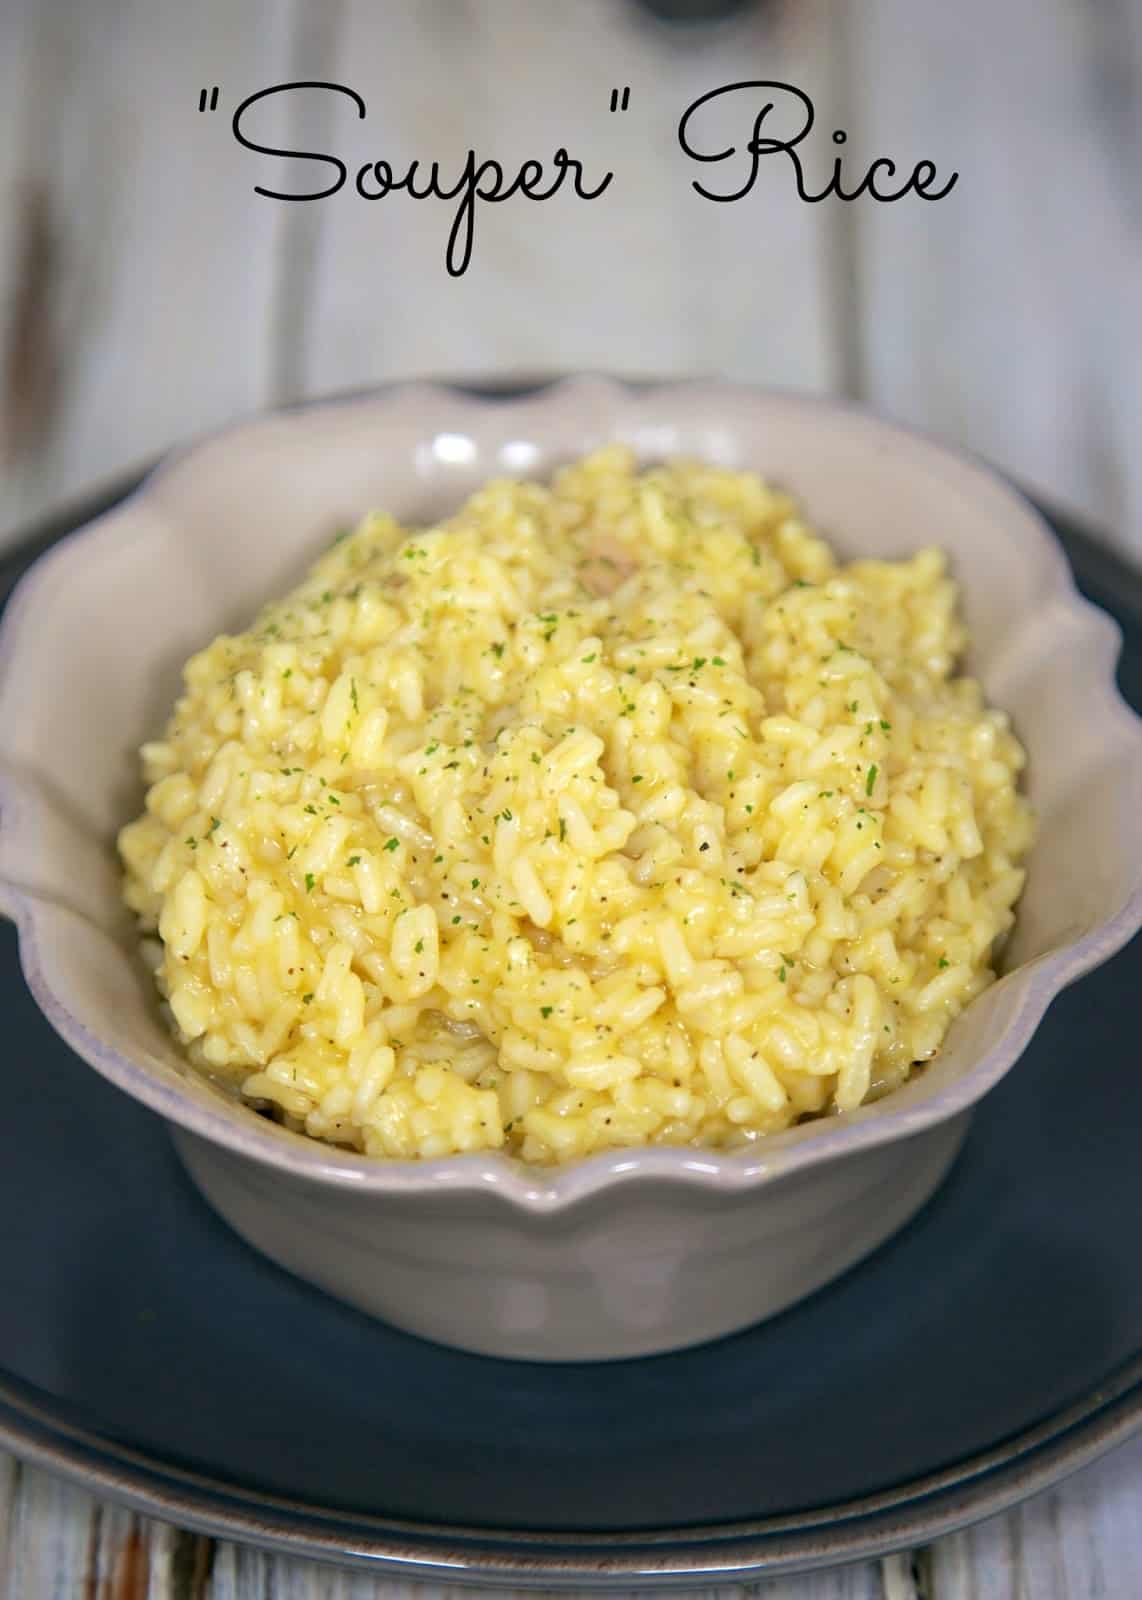 Souper Rice - quick creamy cheater risotto recipe made with minute rice, cream of chicken soup, chicken broth and parmesan cheese - ready in 10 minutes.